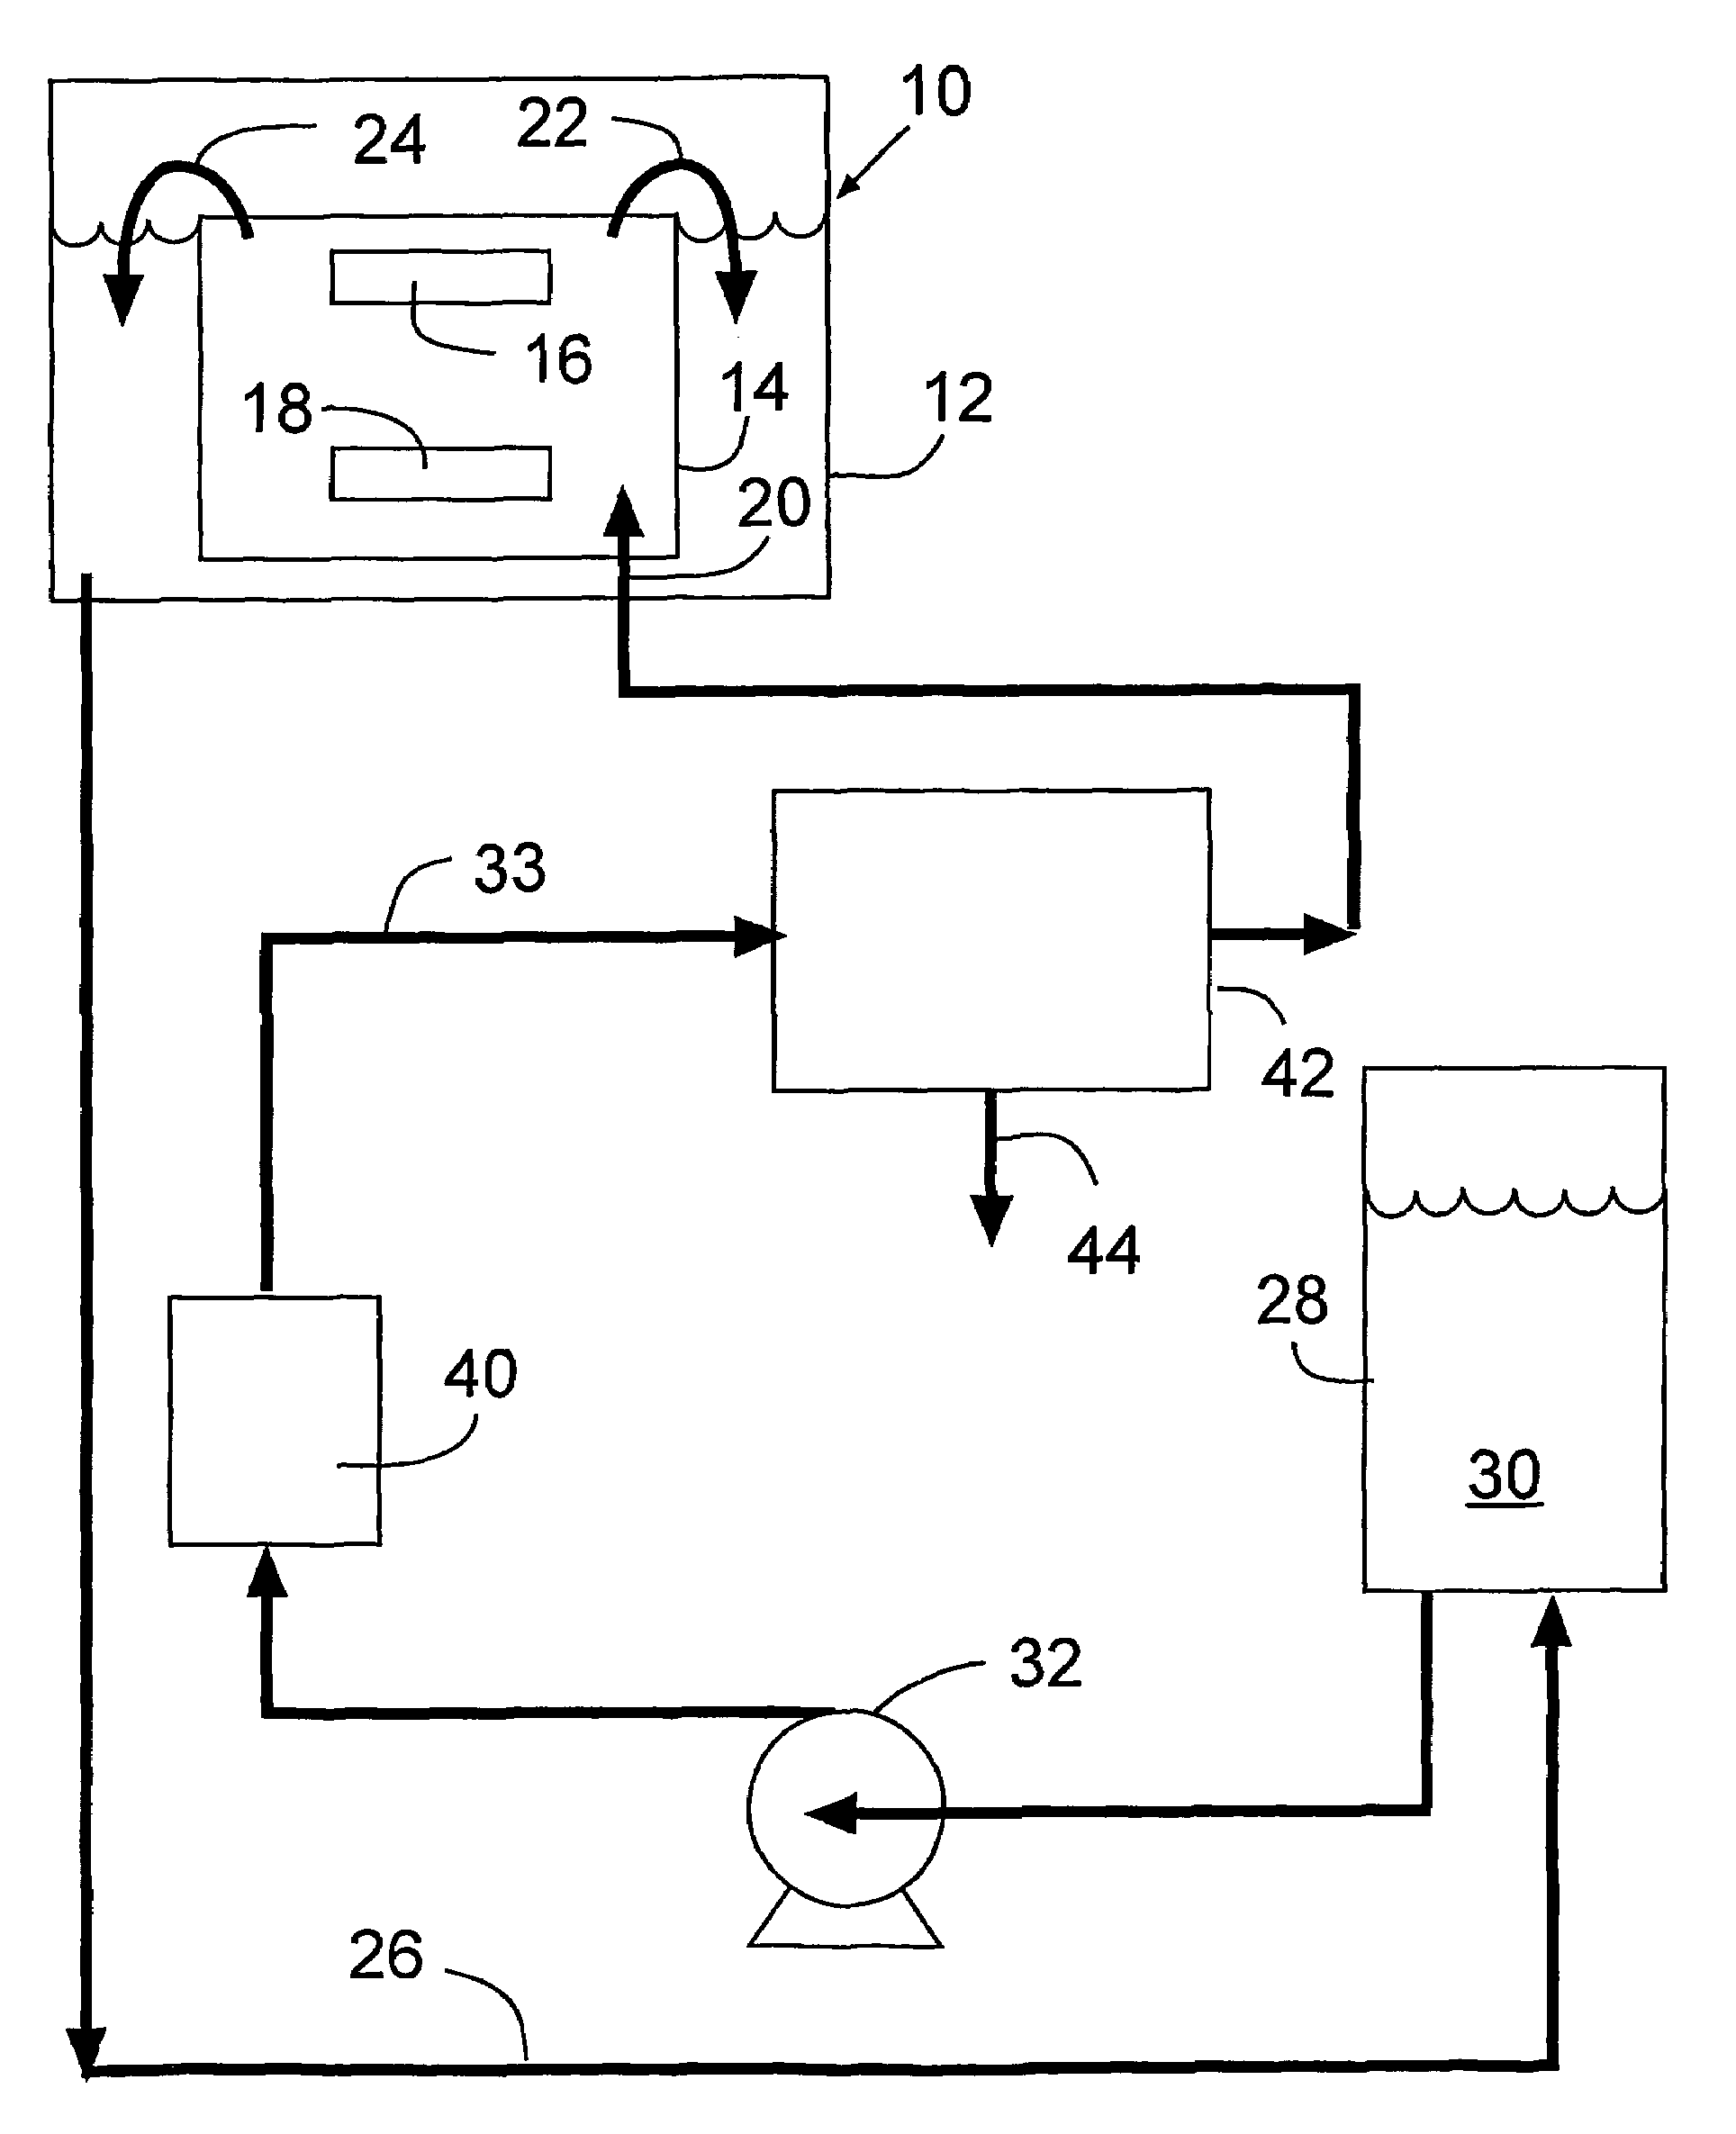 Process for degassing an aqueous plating solution